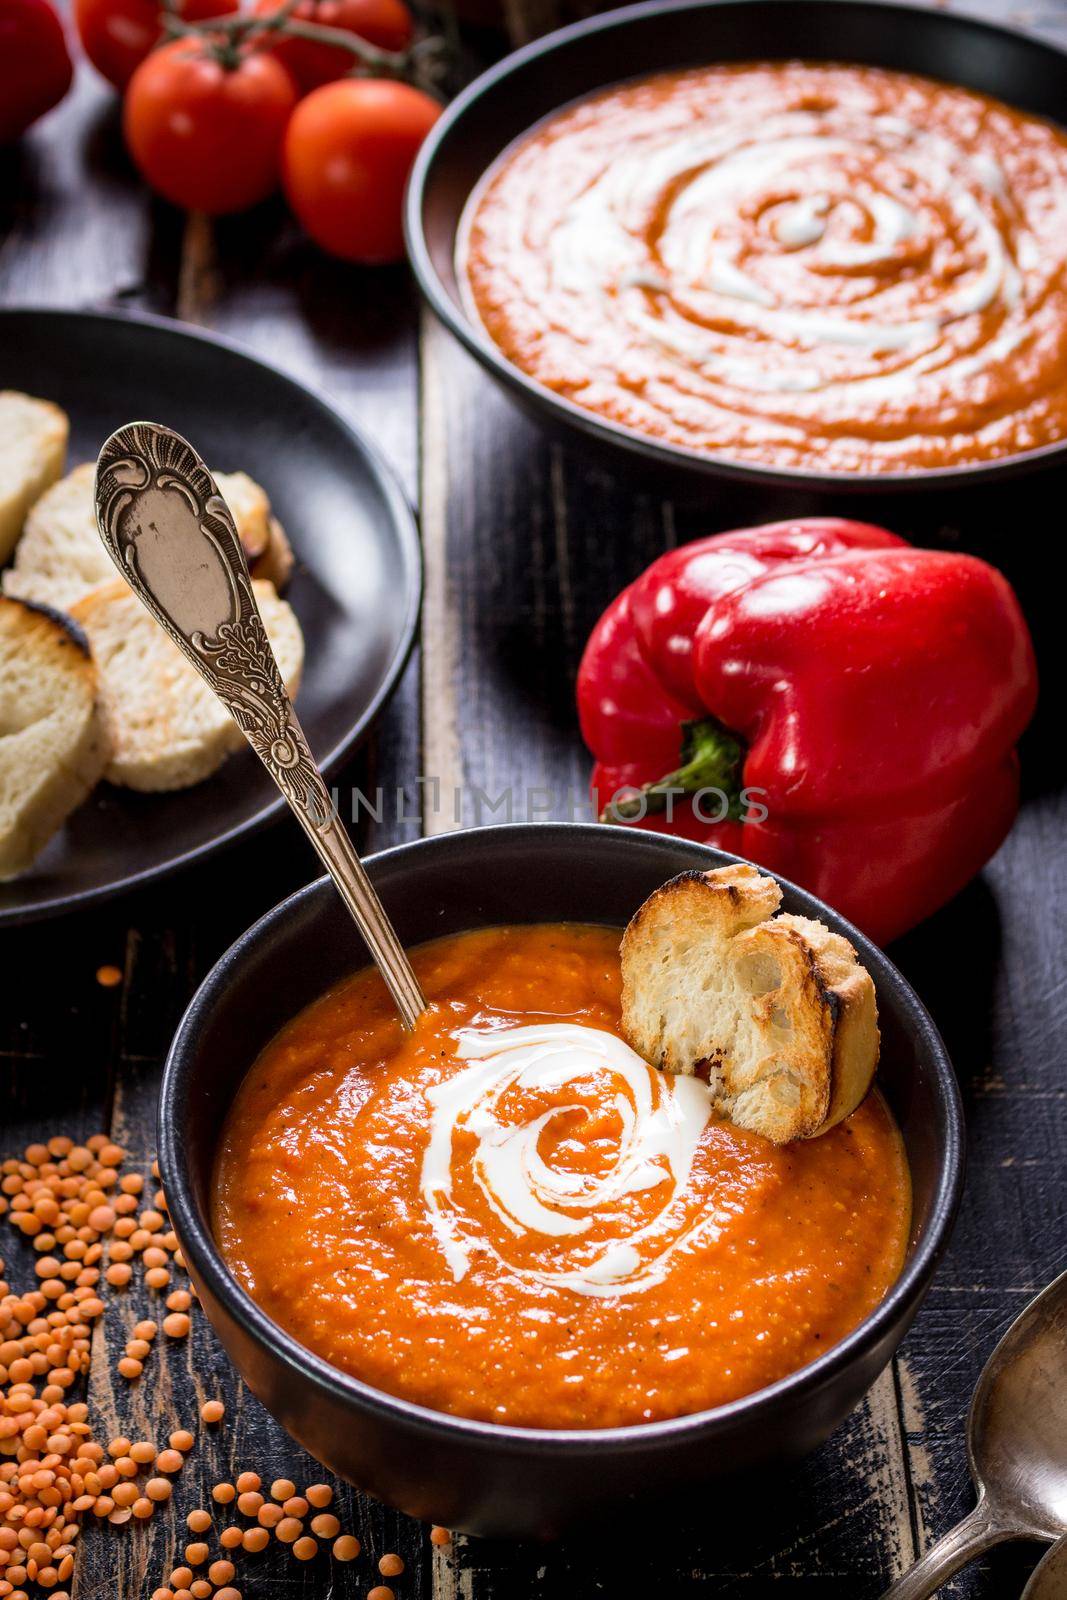 Delicious pumpkin soup with heavy cream on dark rustic wooden table with red bell pepper, bread toasts, lentil, tomatoes